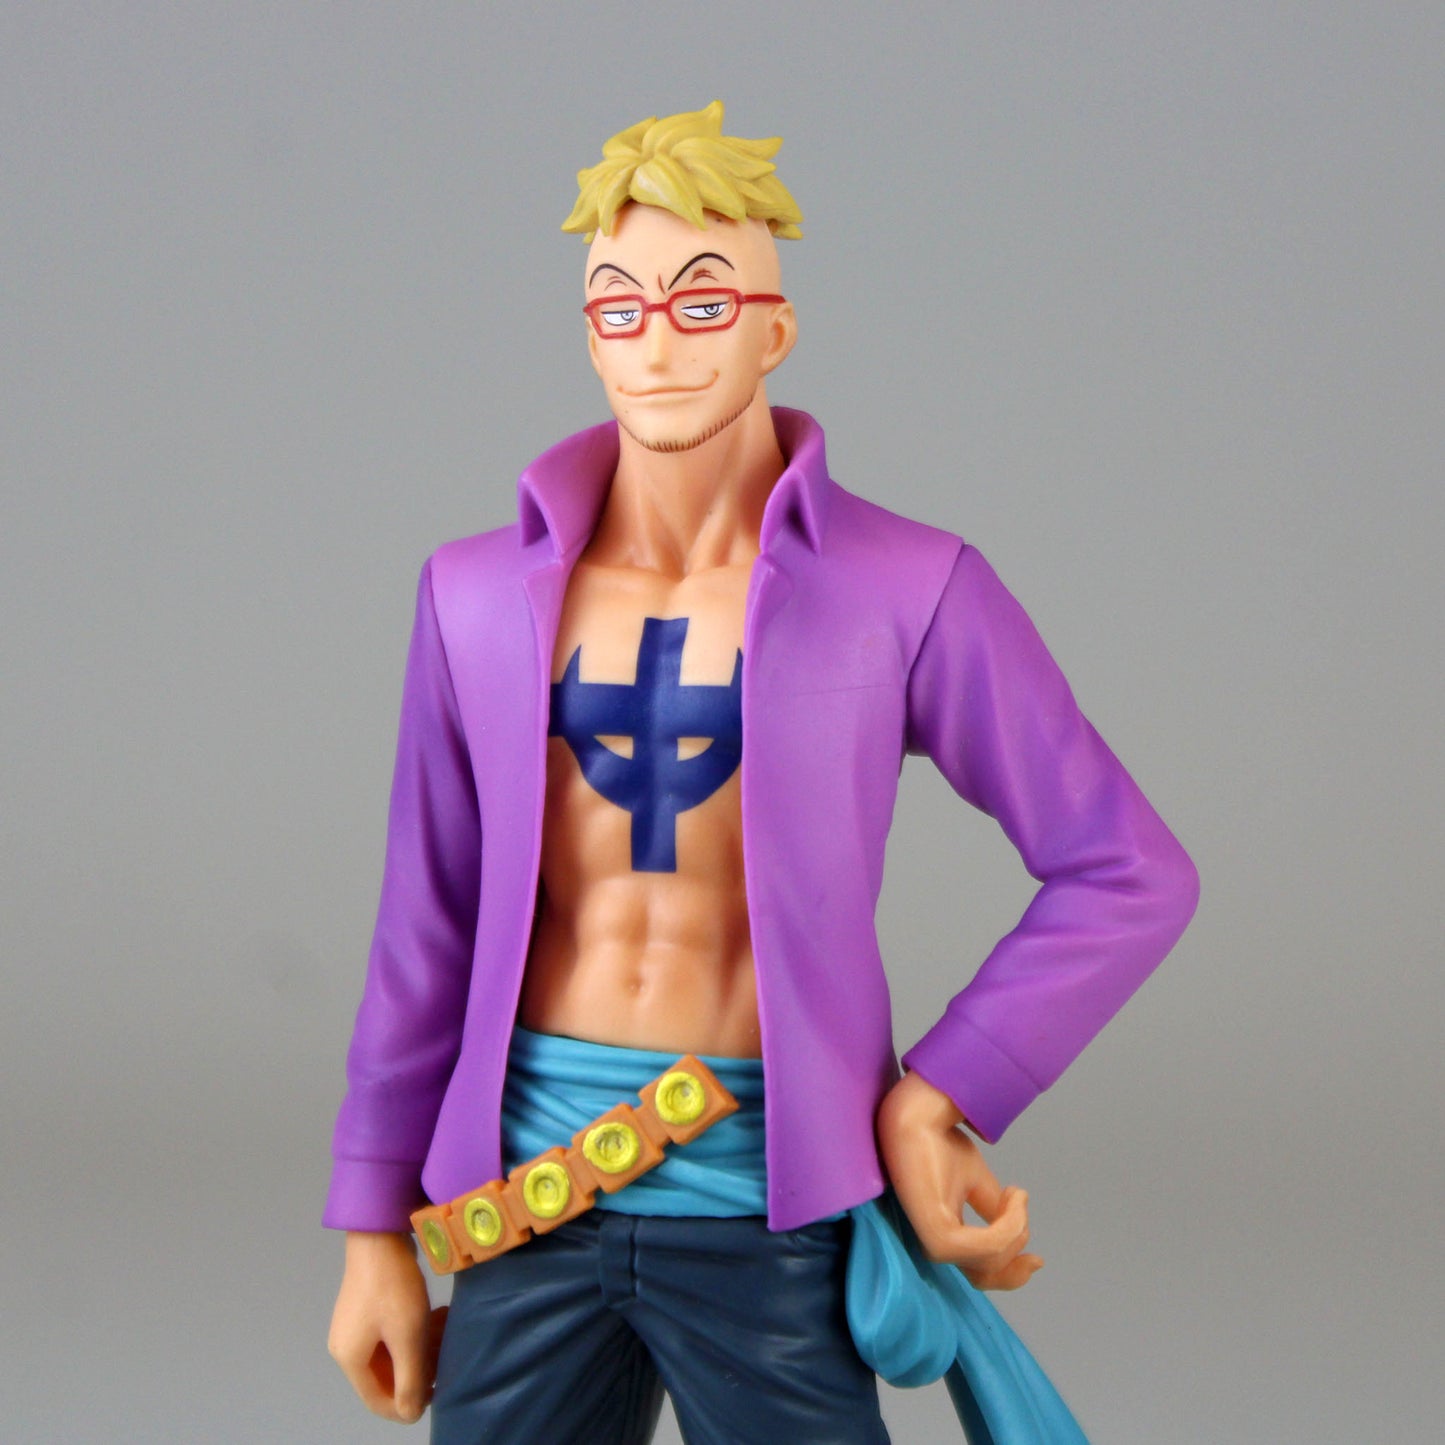 Load image into Gallery viewer, Marco (One Piece) The Grandline Men Vol. 18 DFX Statue
